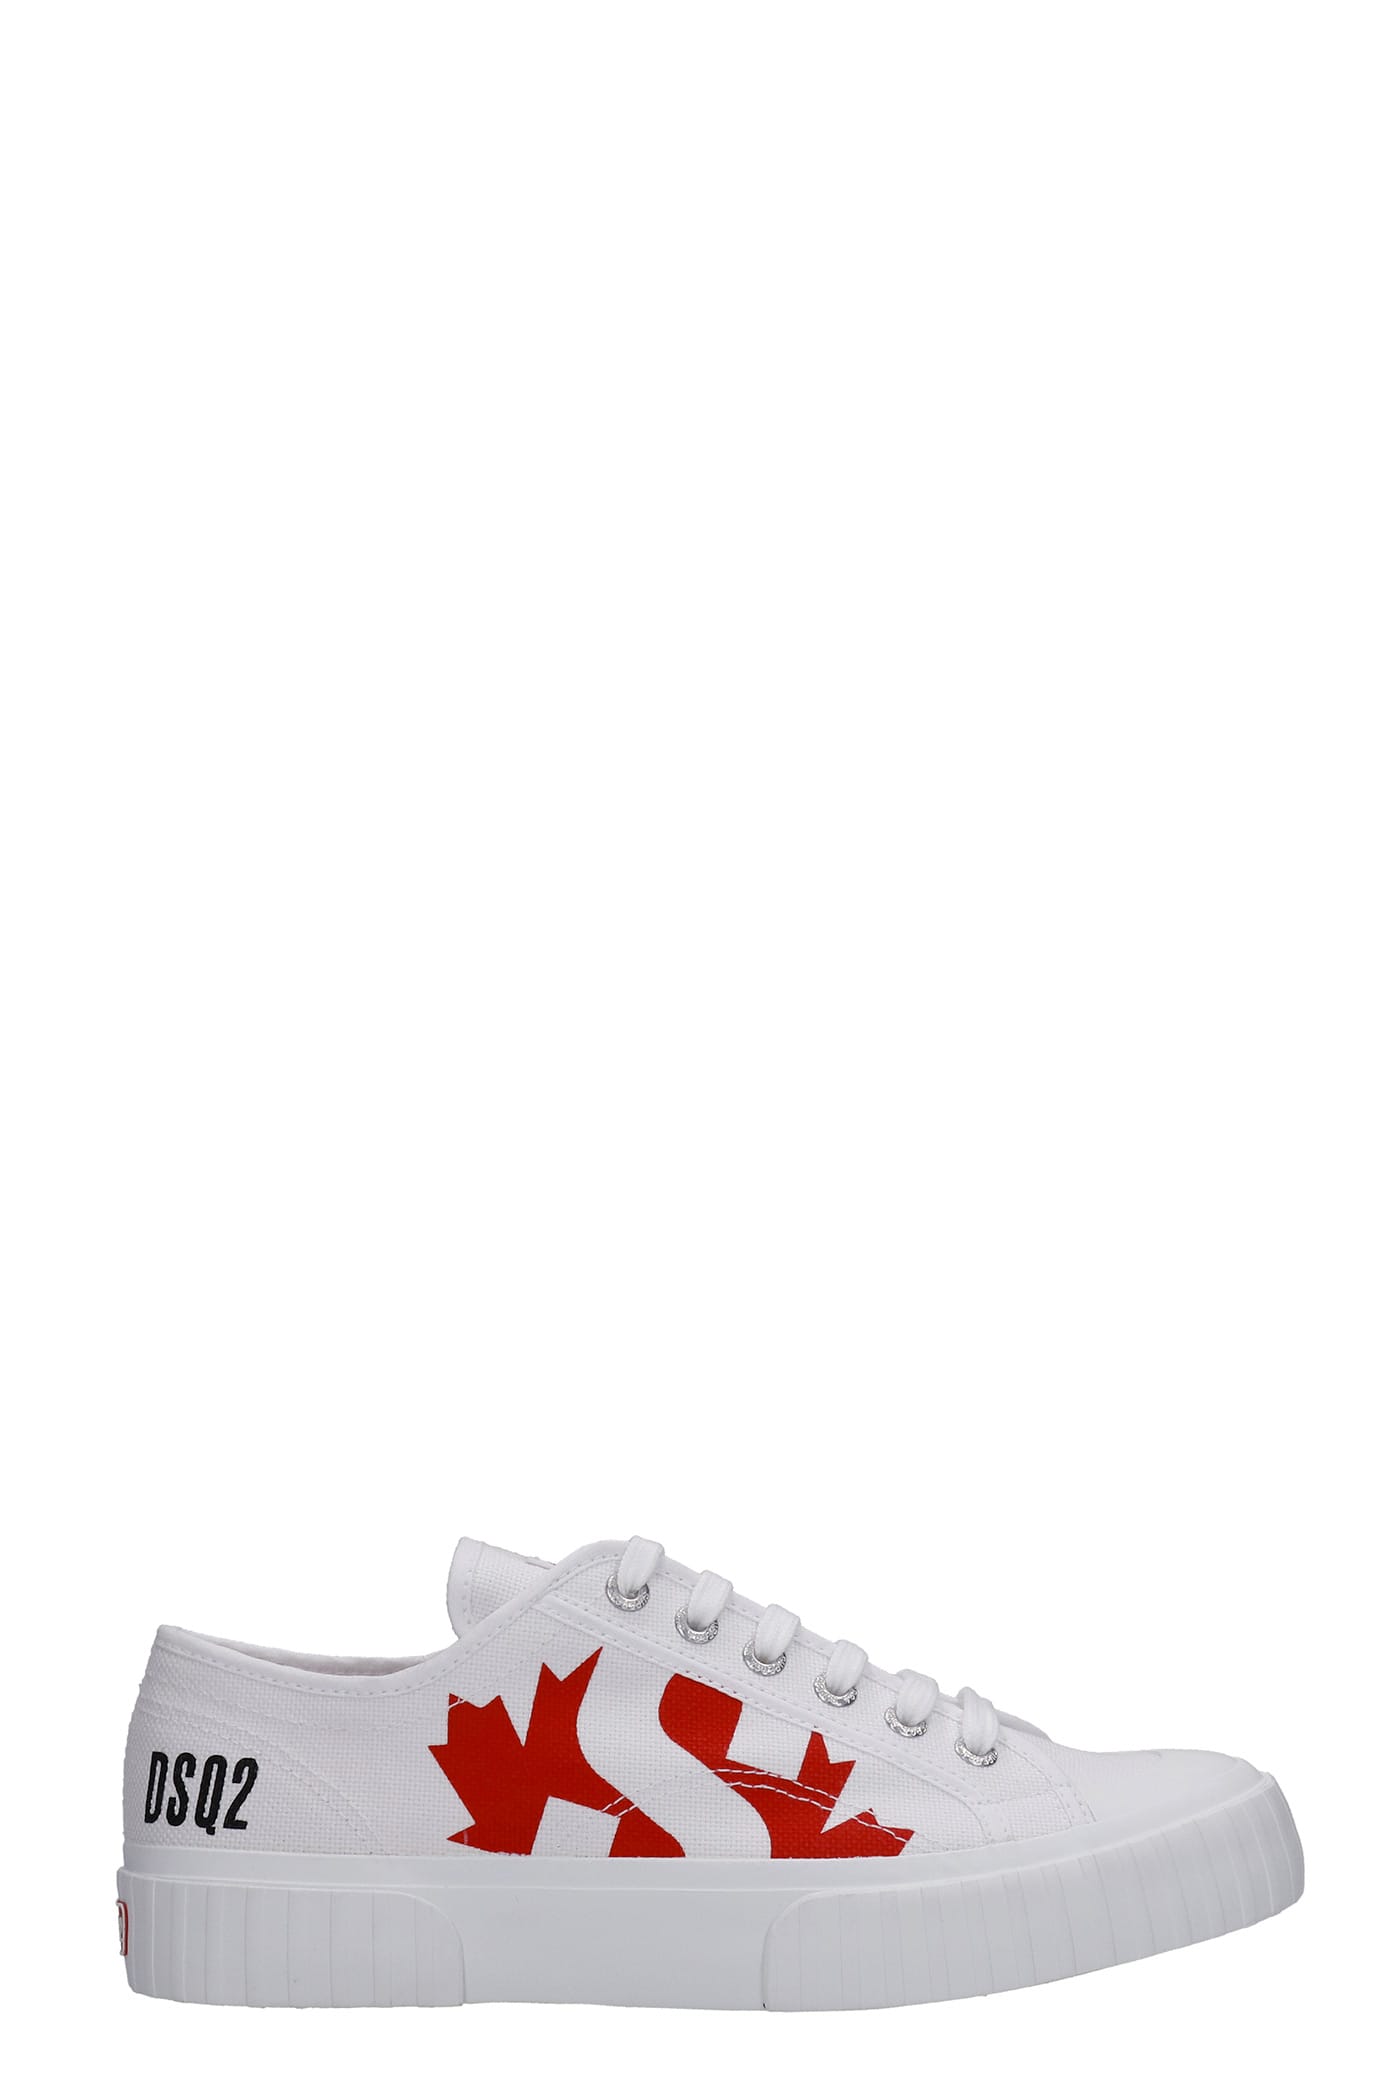 Dsquared2 Sneakers In White Canvas